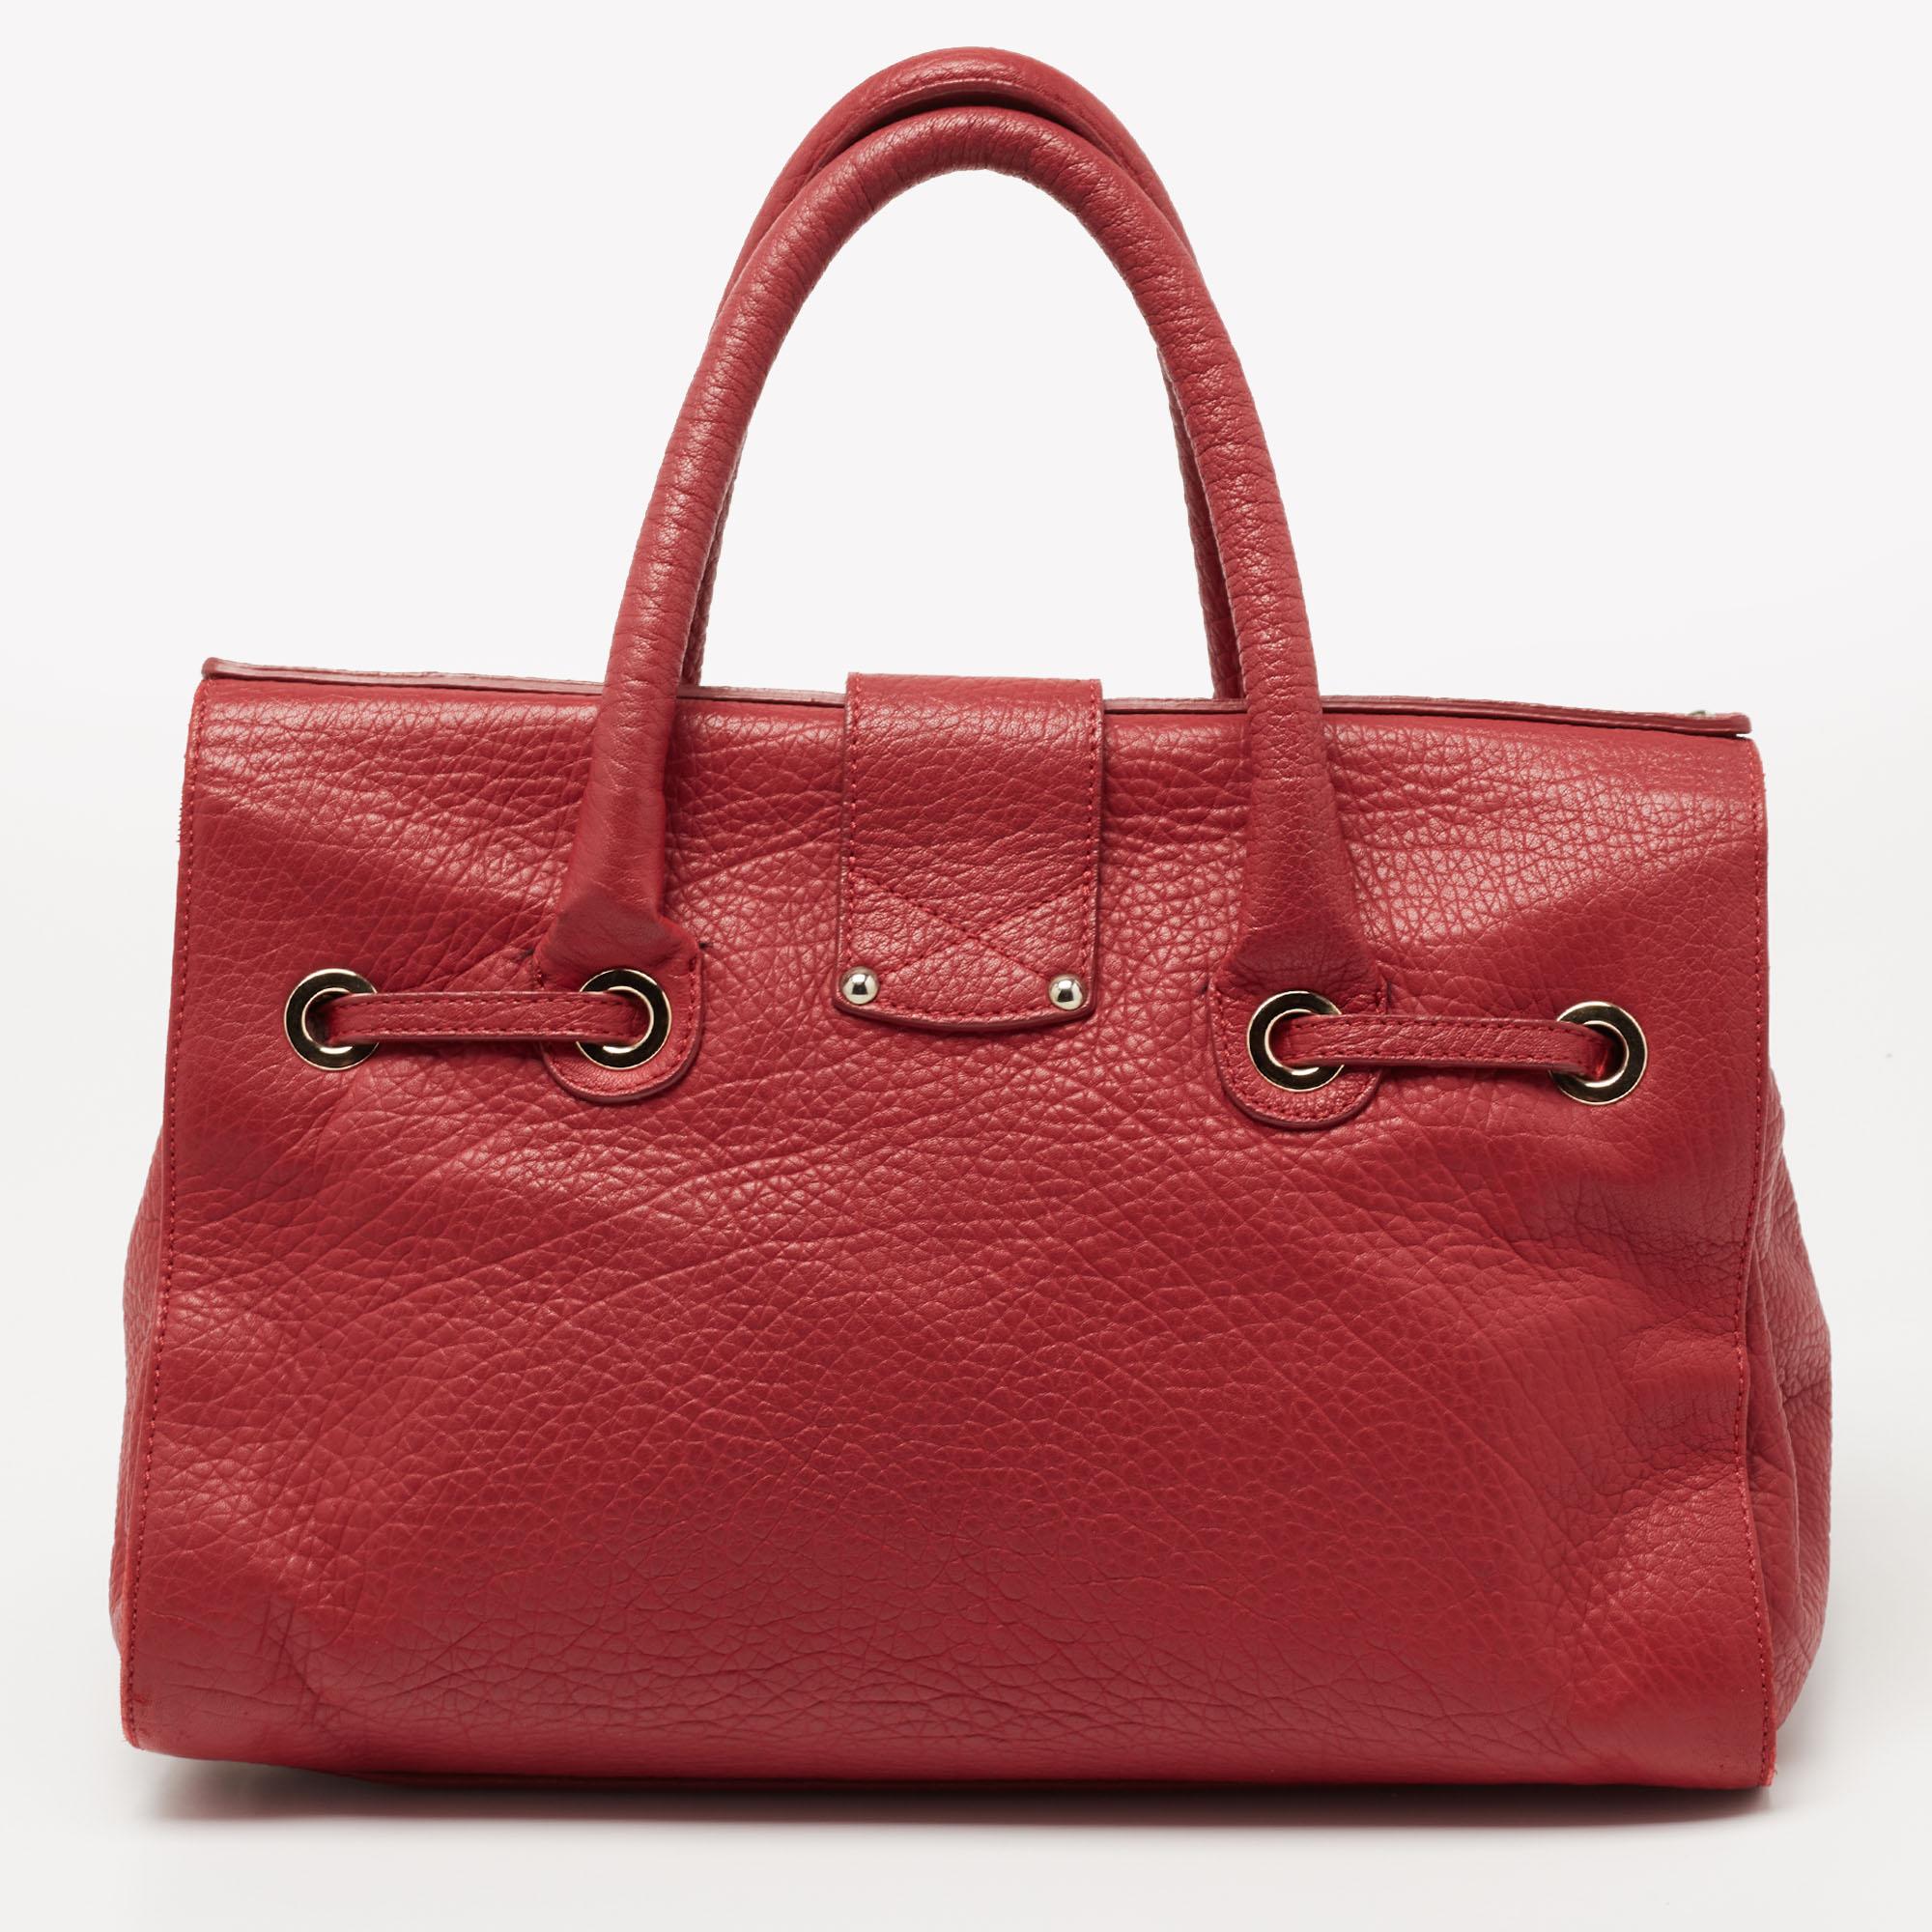 This Jimmy Choo Rosalie is a practical handbag with a luxe touch. Crafted from leather, it has a red shade, an engraved flip closure in gold-tone hardware, dual top handles, a removable shoulder strap, and protective feet at the bottom. Finished